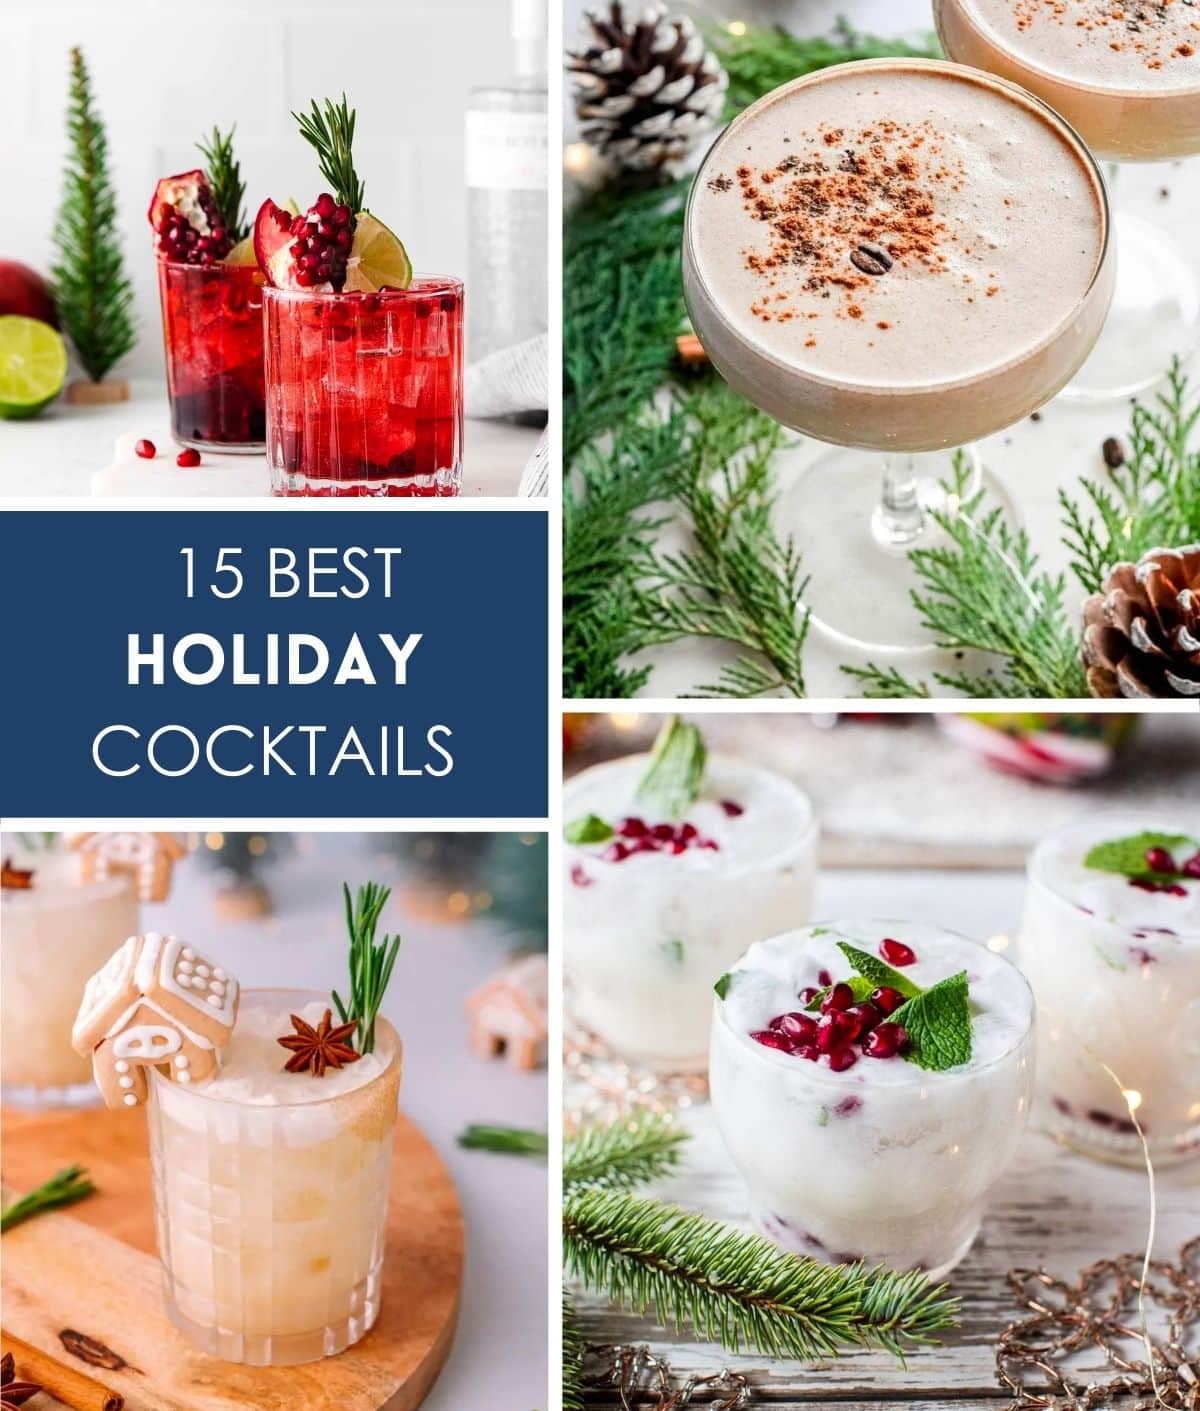 15 Best Holiday Cocktails